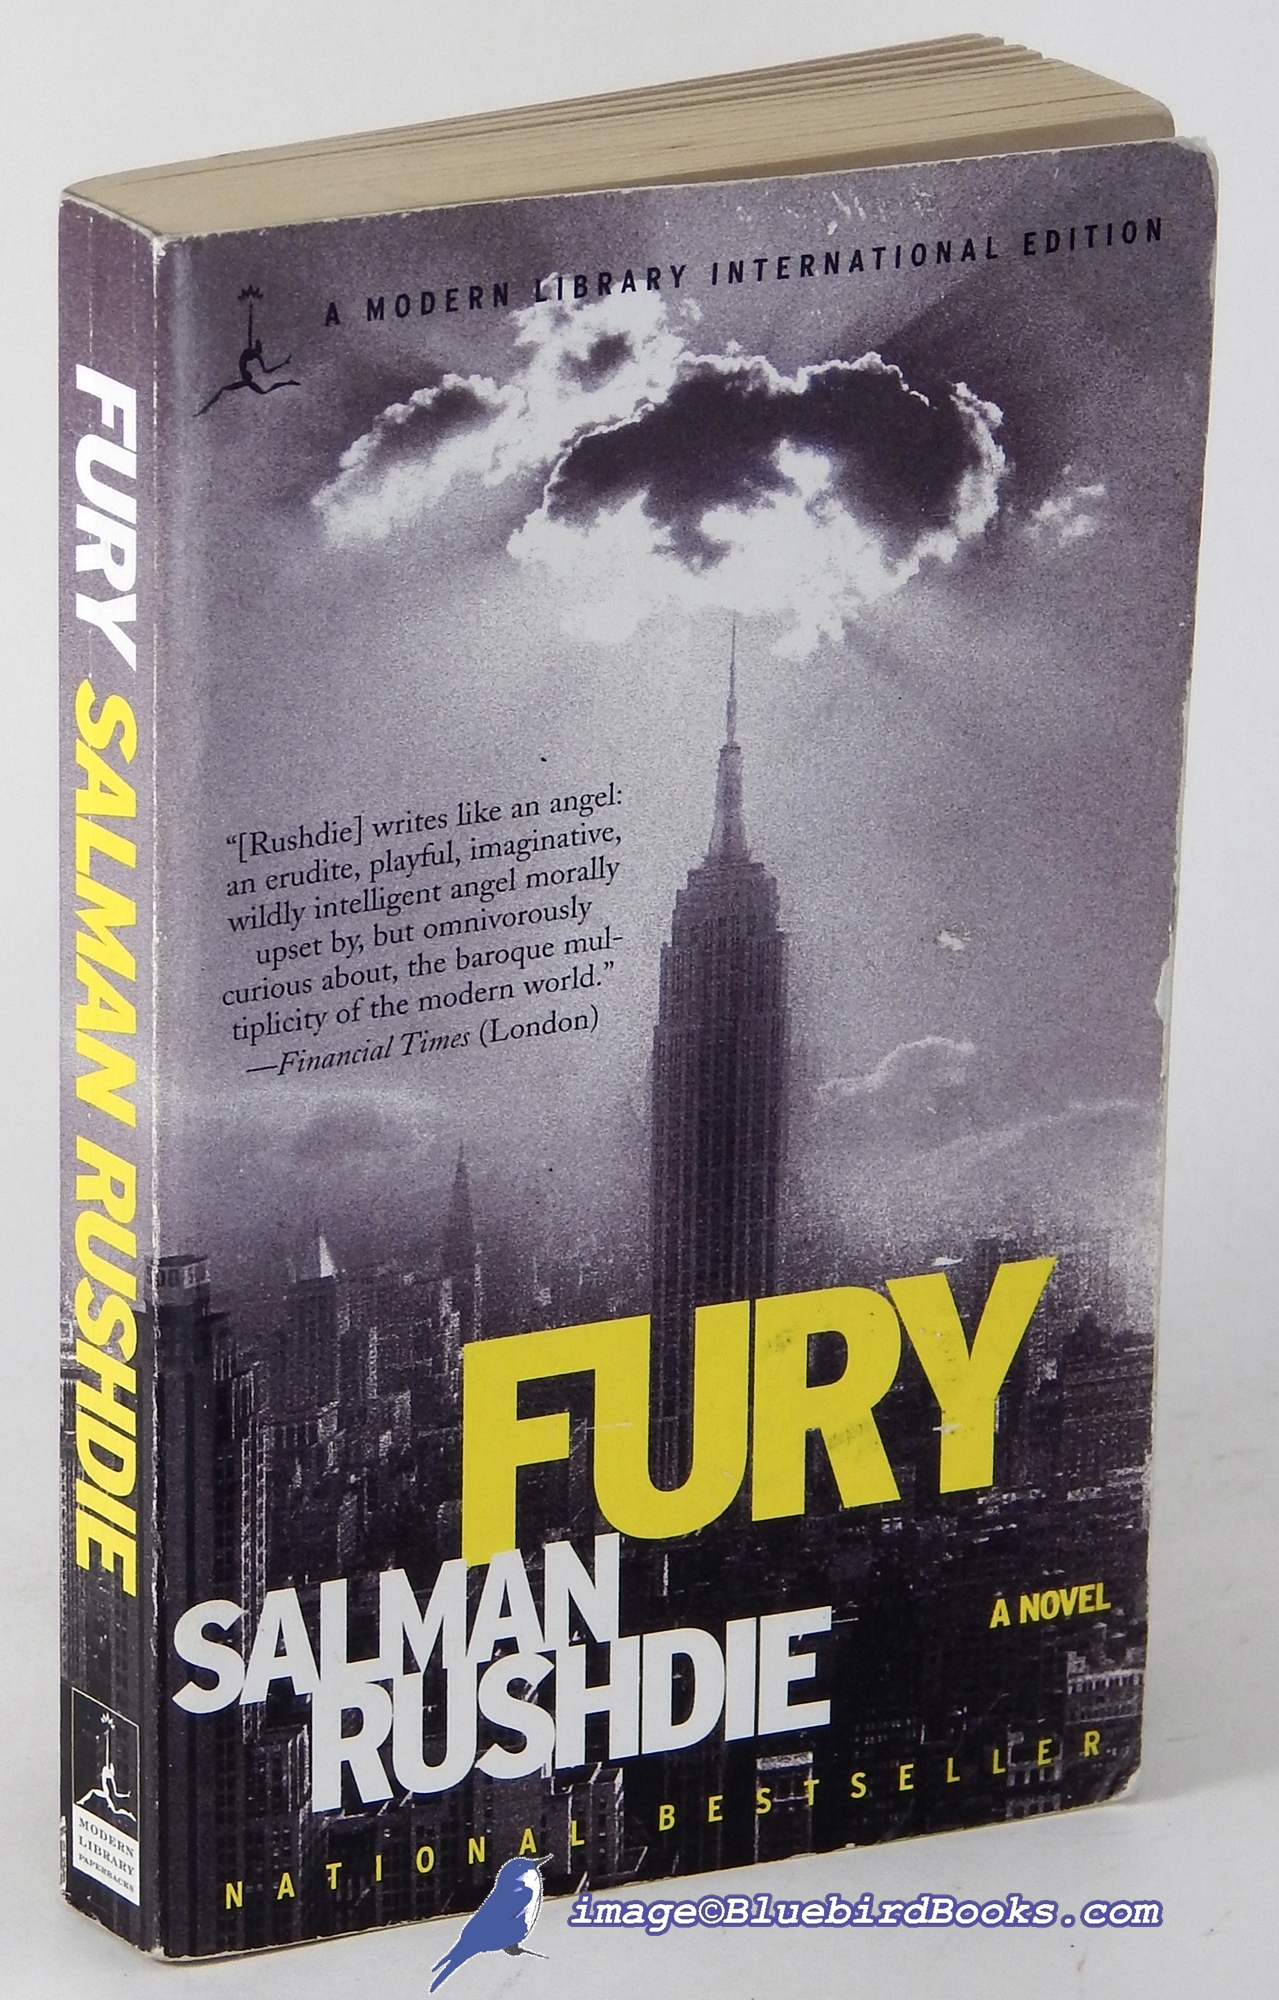 RUSHDIE, SALMAN - Fury (Modern Library Softcover)